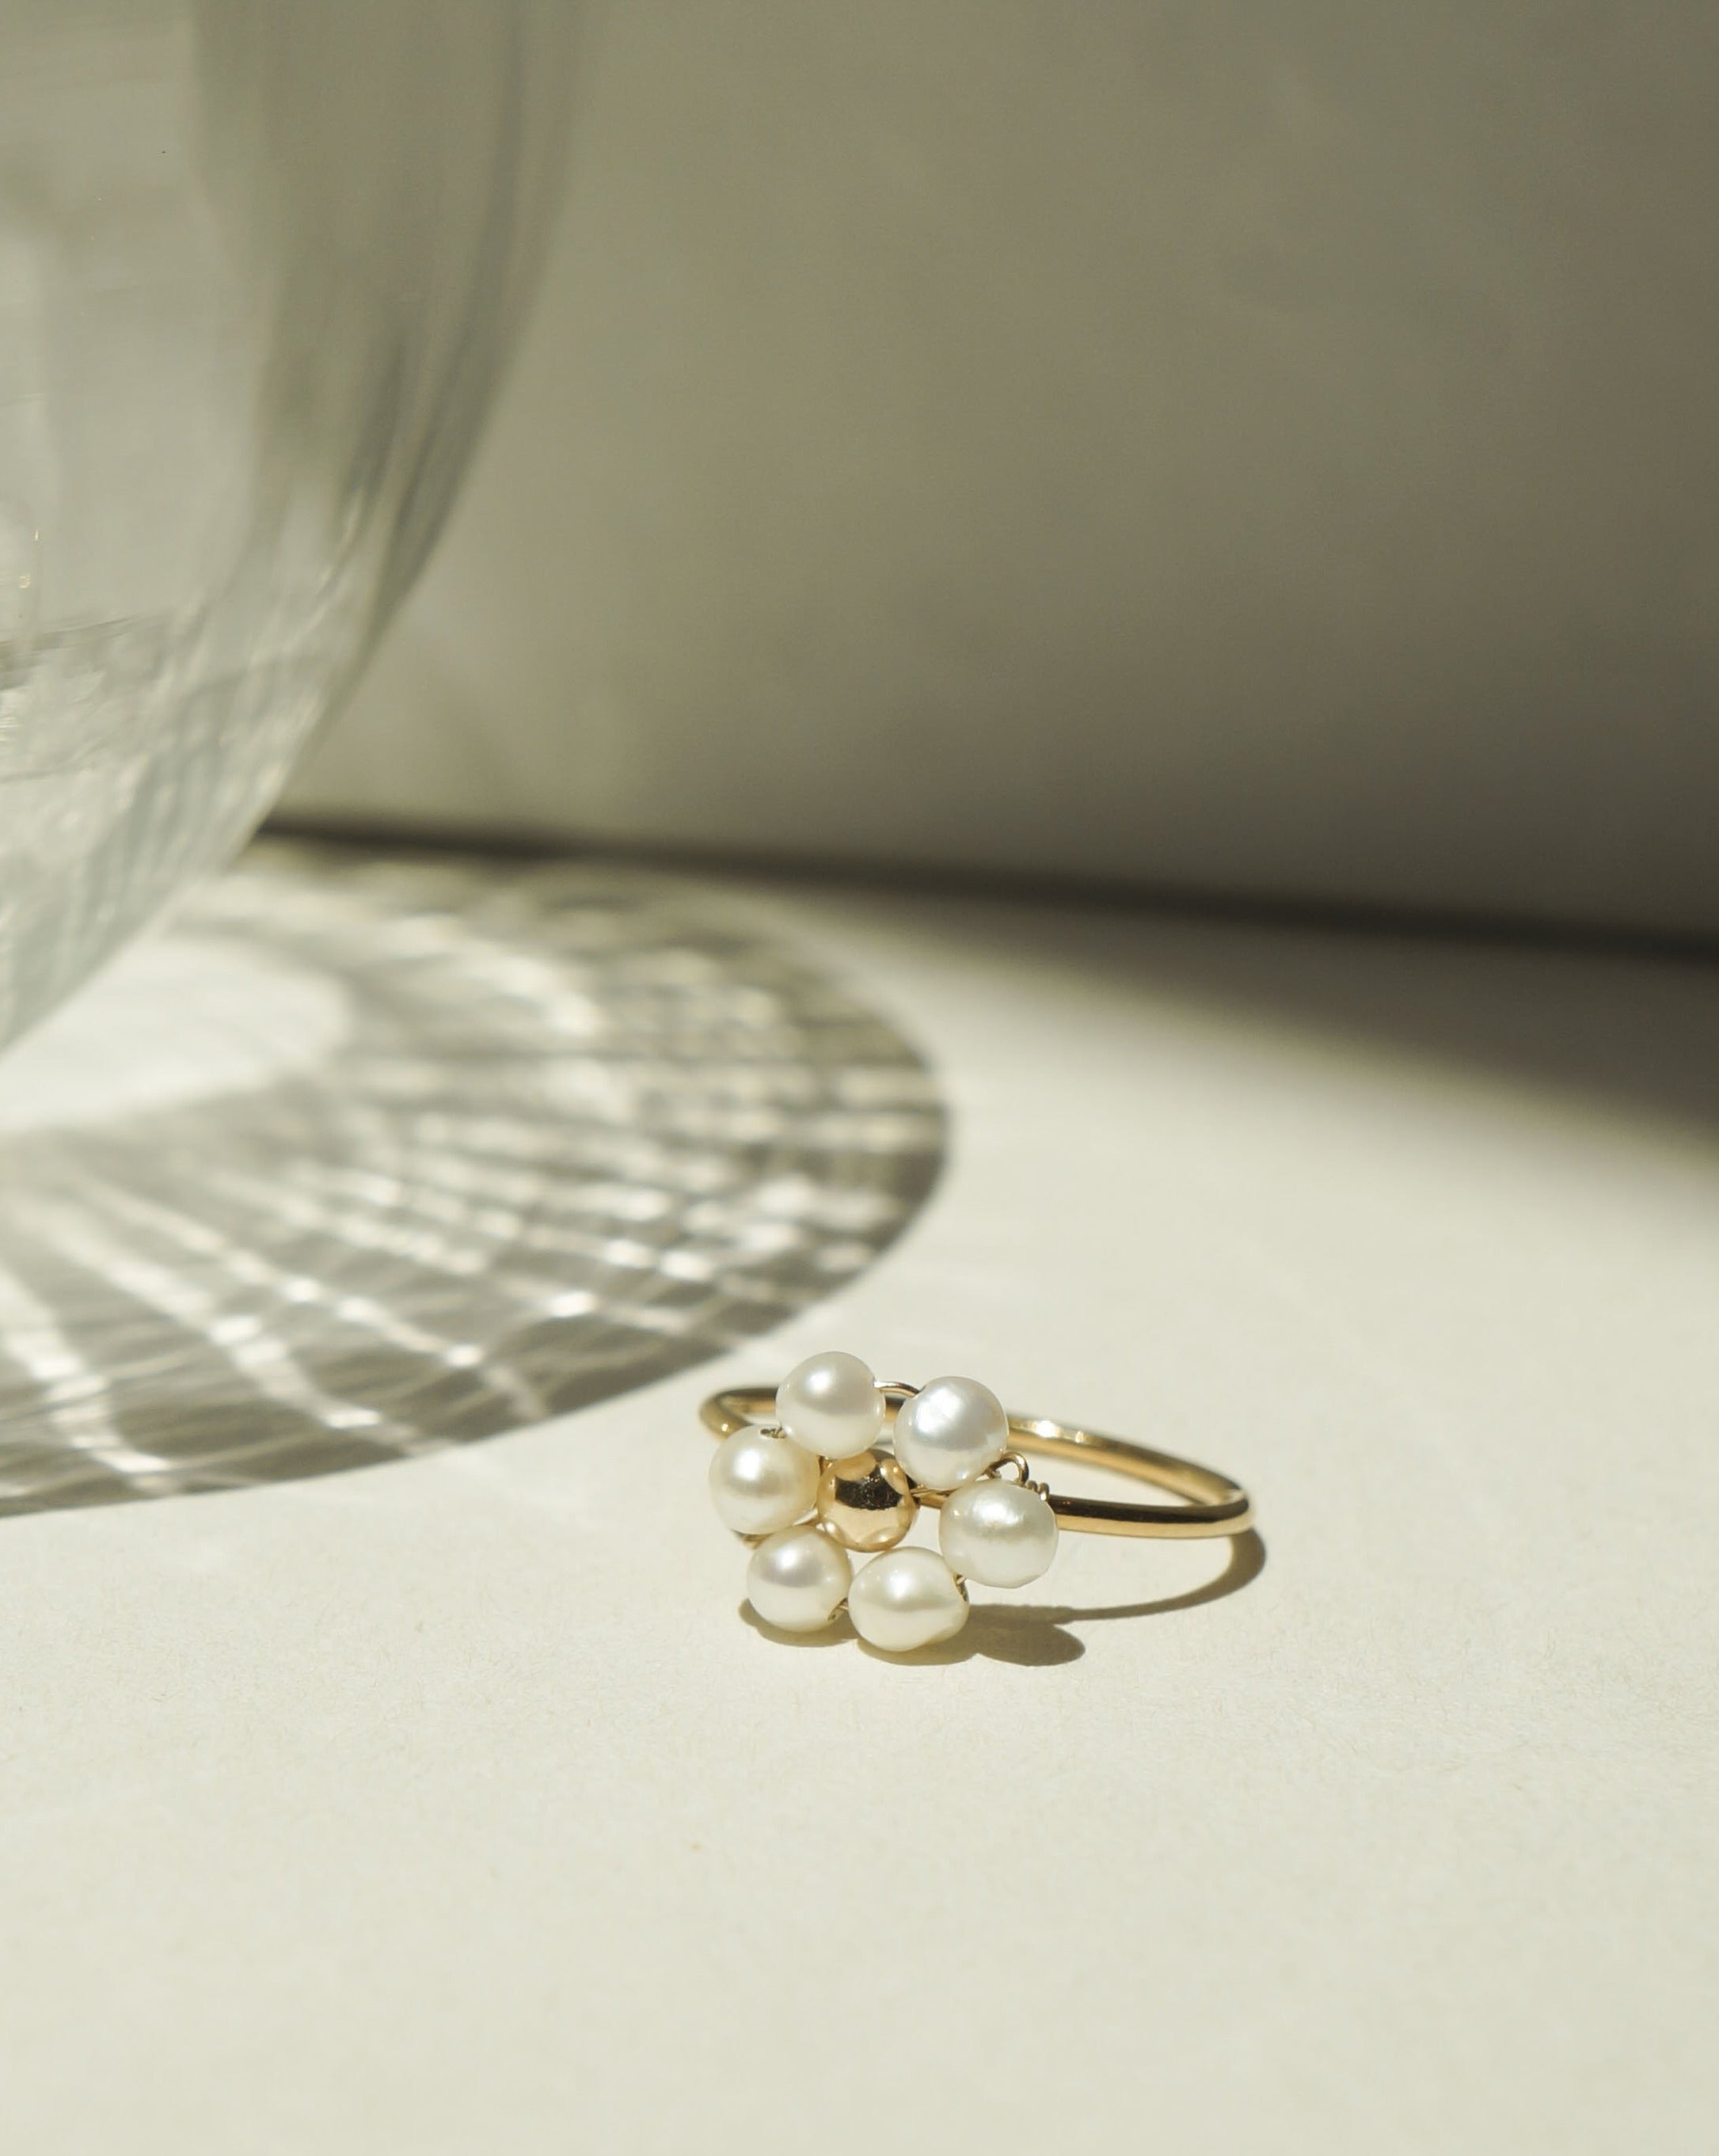 Sun Ring by KOZAKH. A 1mm round ring, crafted in 14K Gold Filled, featuring white freshwater Pearls and a gold bead forming a handmade daisy charm.